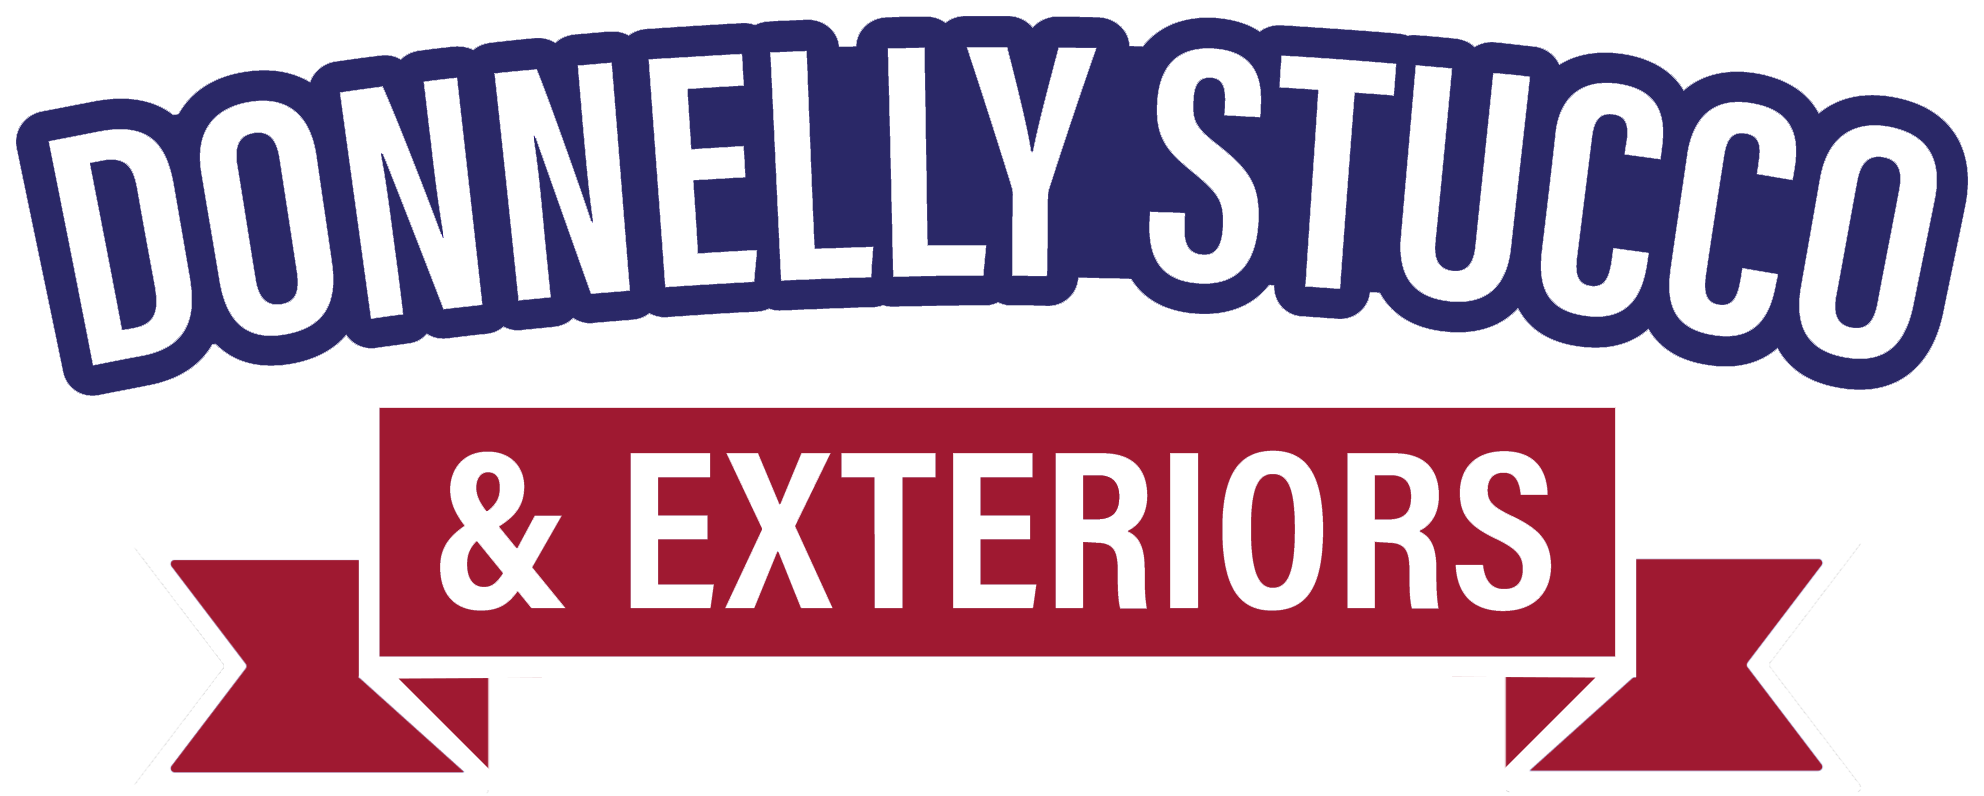 Donnelly Stucco & Exteriors Logo